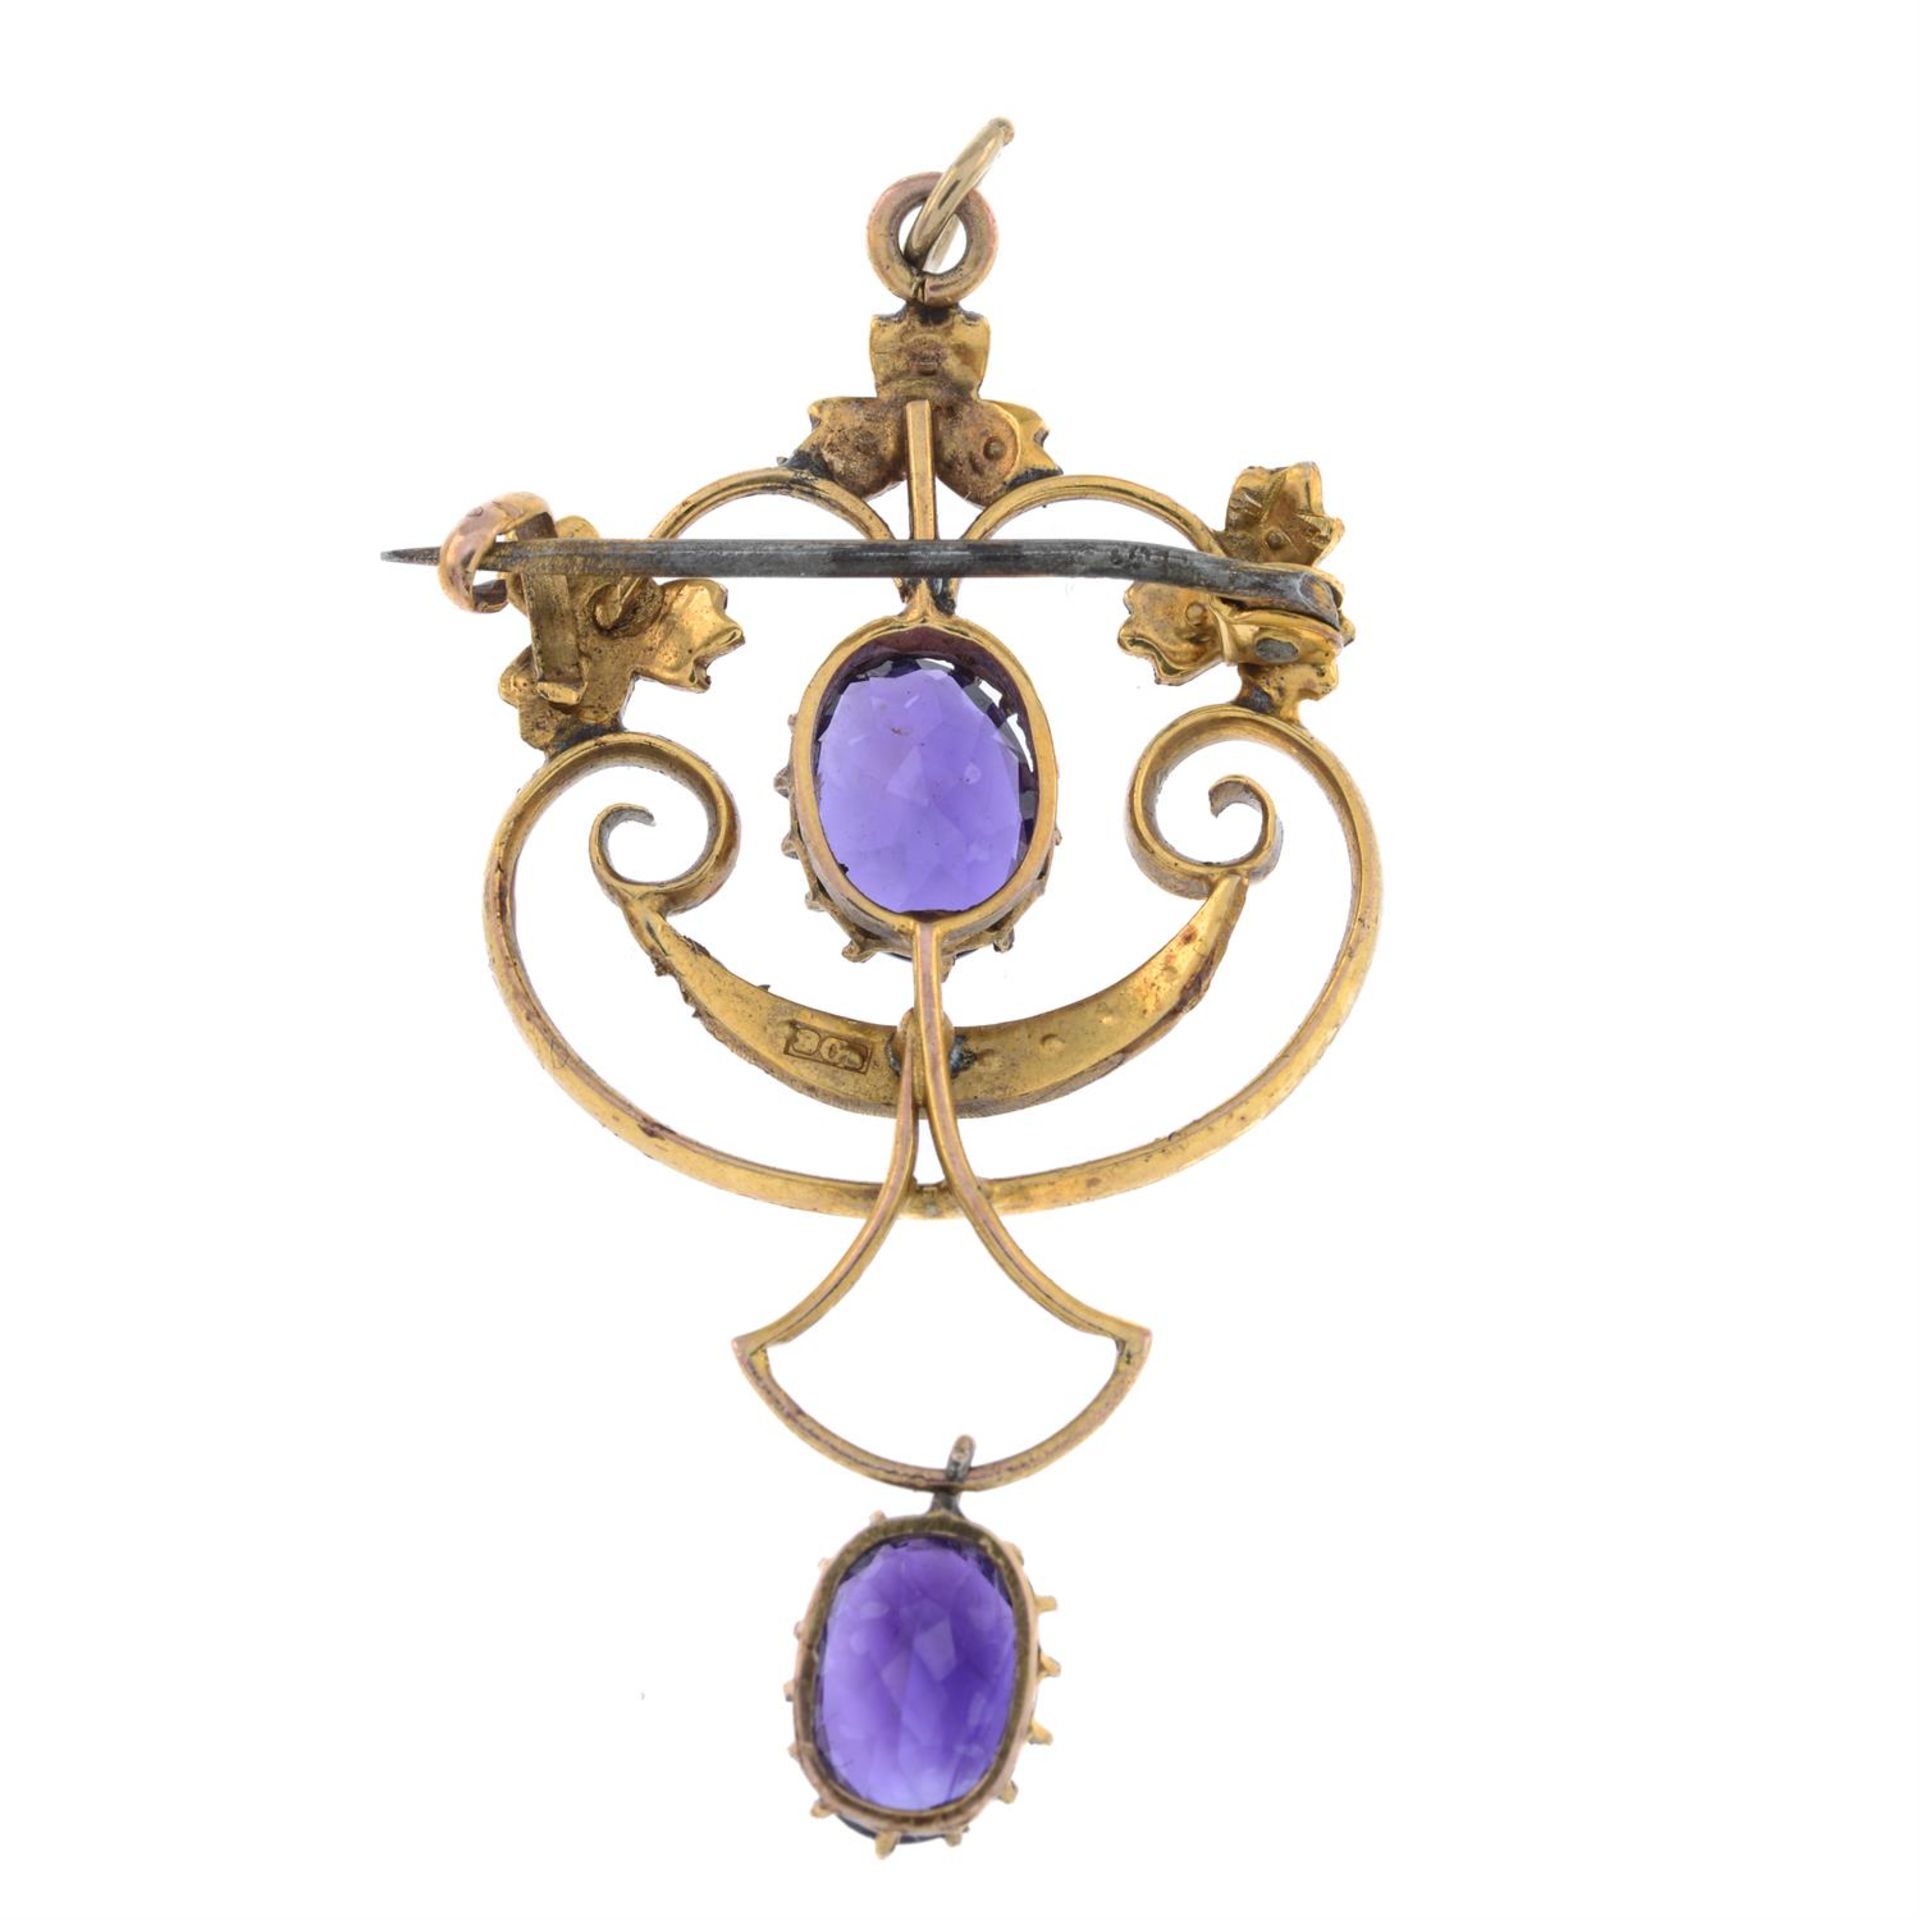 Early 20th century gold gem pendant - Image 2 of 2